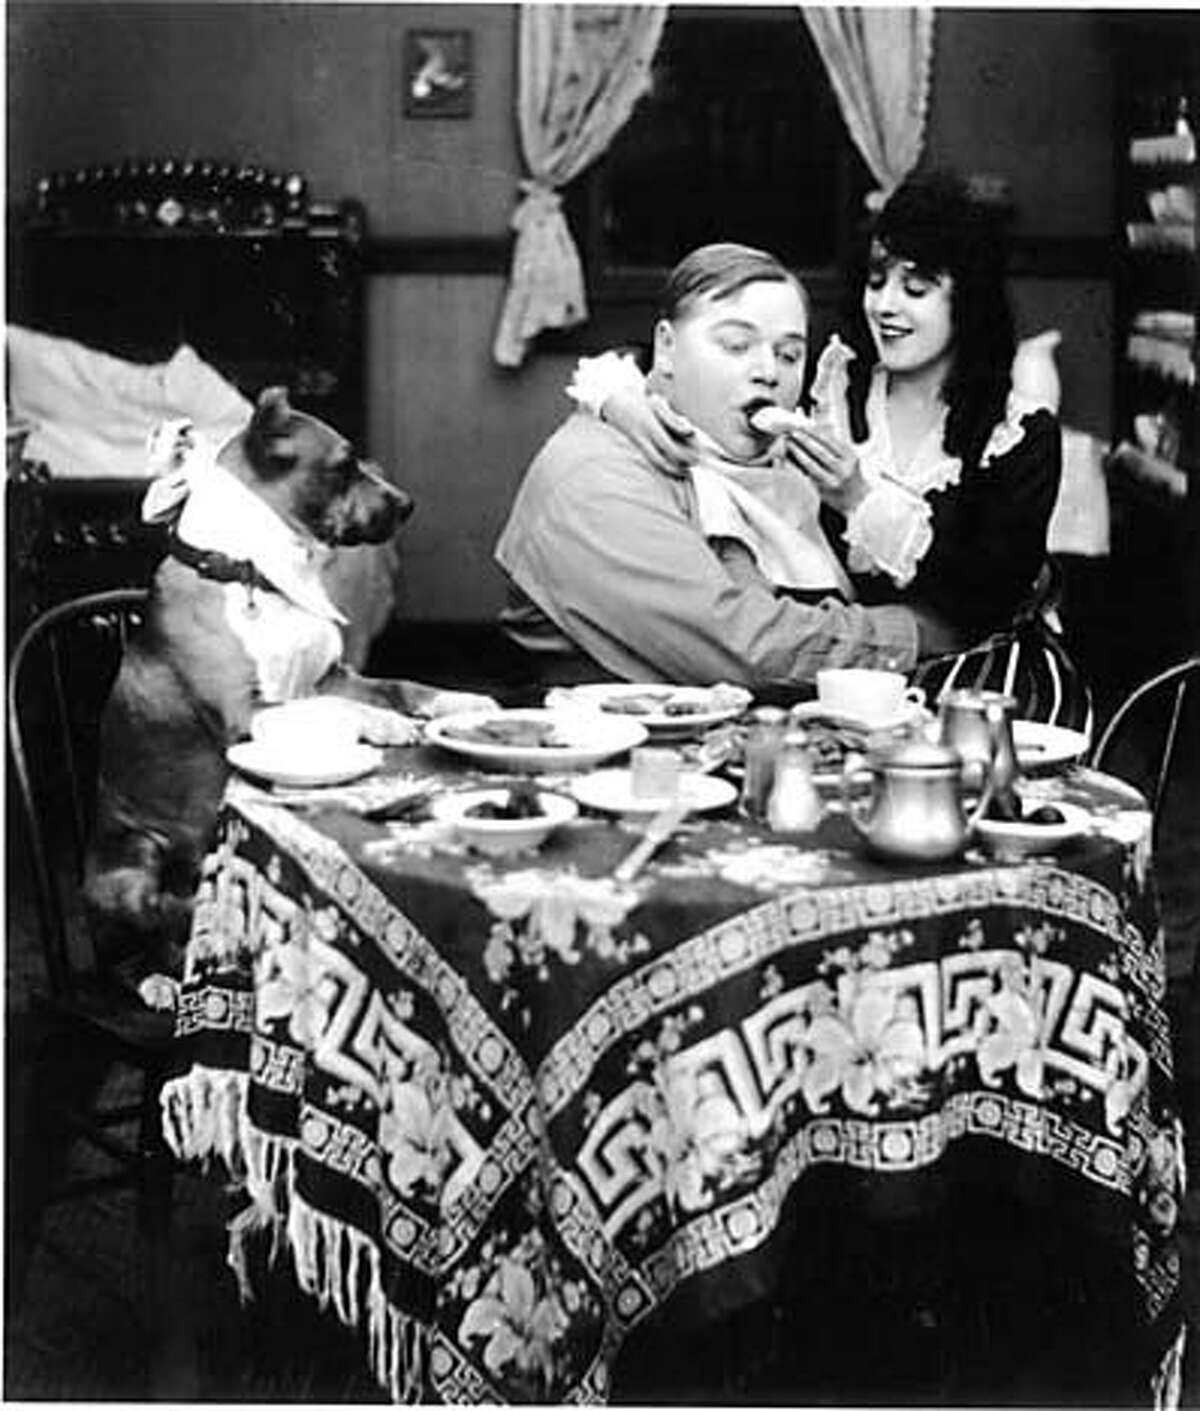 Fatty Arbuckle and Mabel Normand in the 1916 comedy "Fatty and Mabel Adrift"